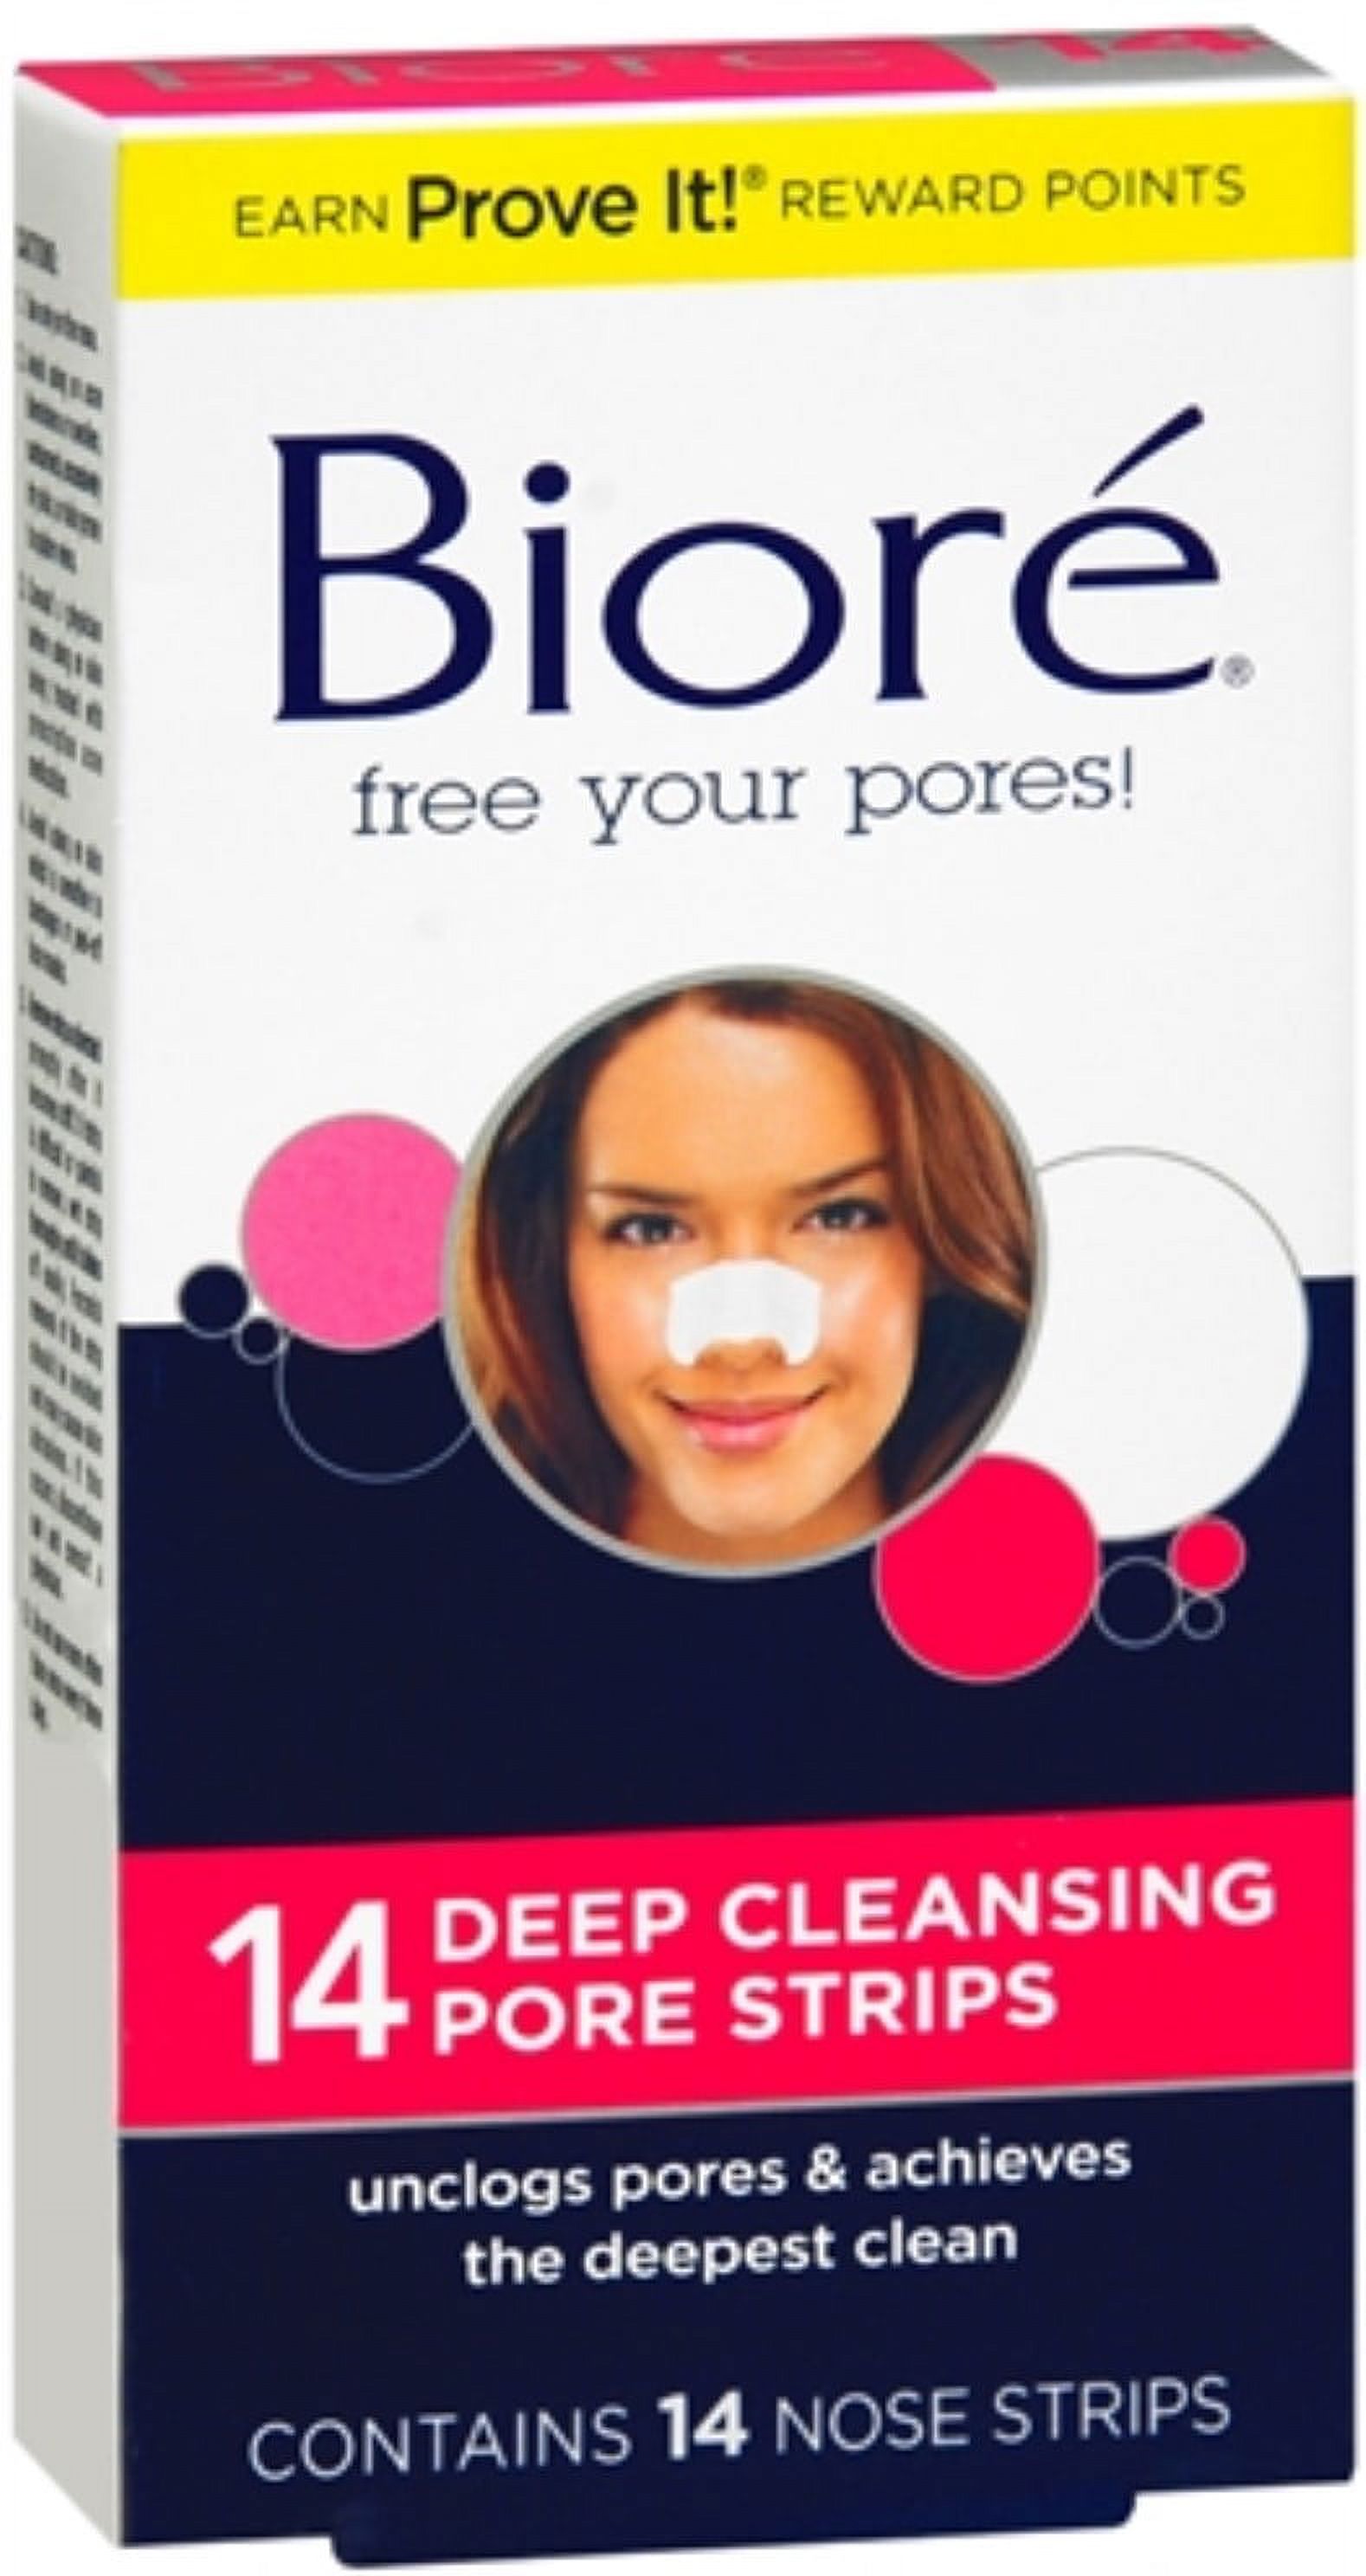 Biore Deep Cleansing Pore Strips Nose, 14 Each (Pack of 2) - image 1 of 3